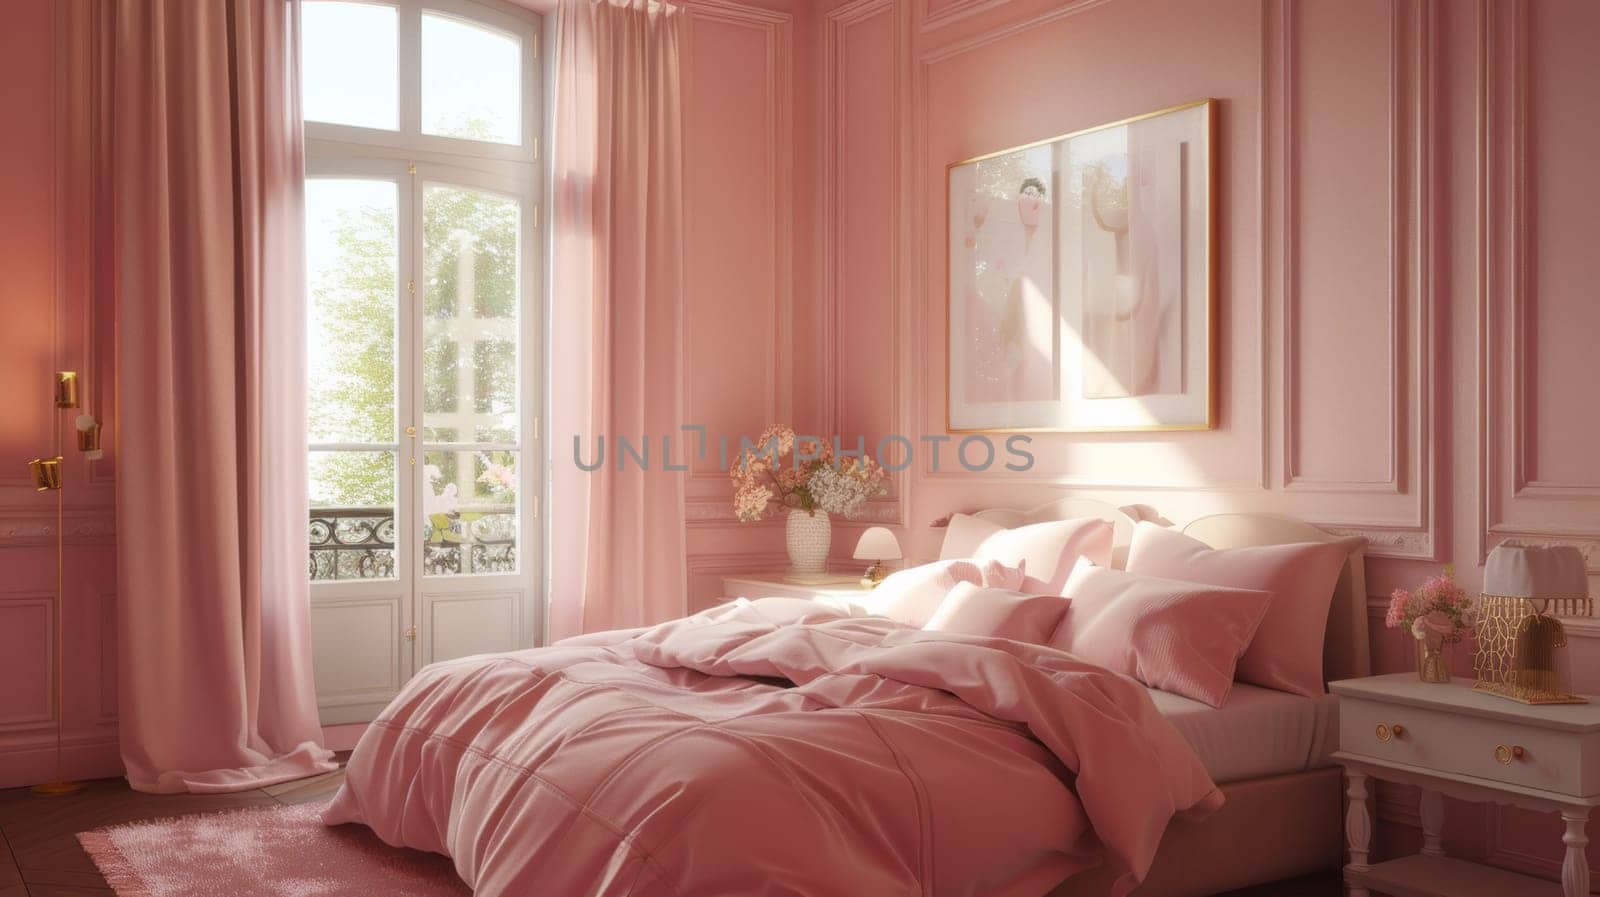 A bedroom with pink walls and a bed covered in white sheets